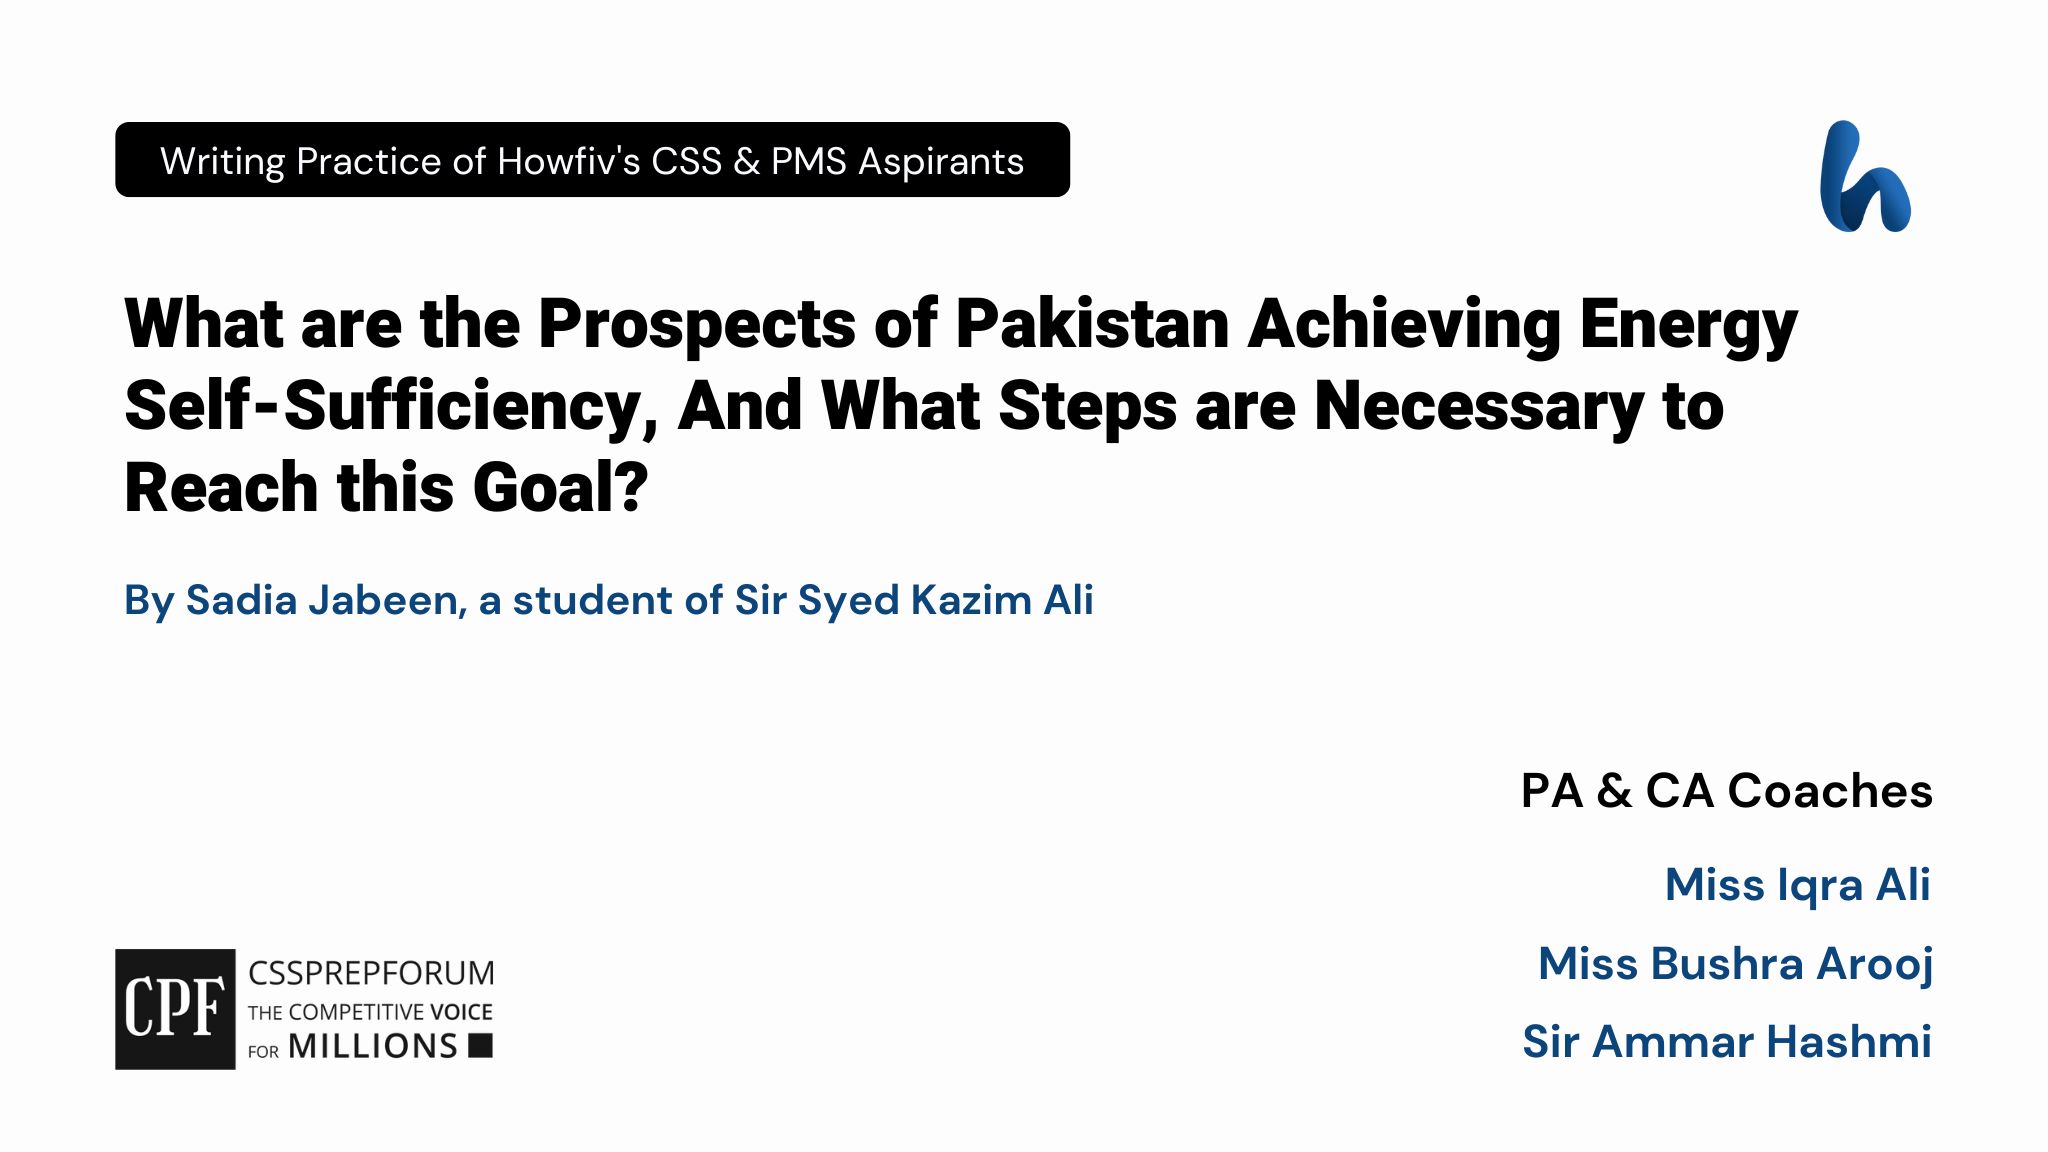 CSS Current Affairs article | Prospects for Pakistan Achieving Energy Self-Sufficiency | is written by Sadia Jabeen Under the supervision of Sir Ammar Hashmi...